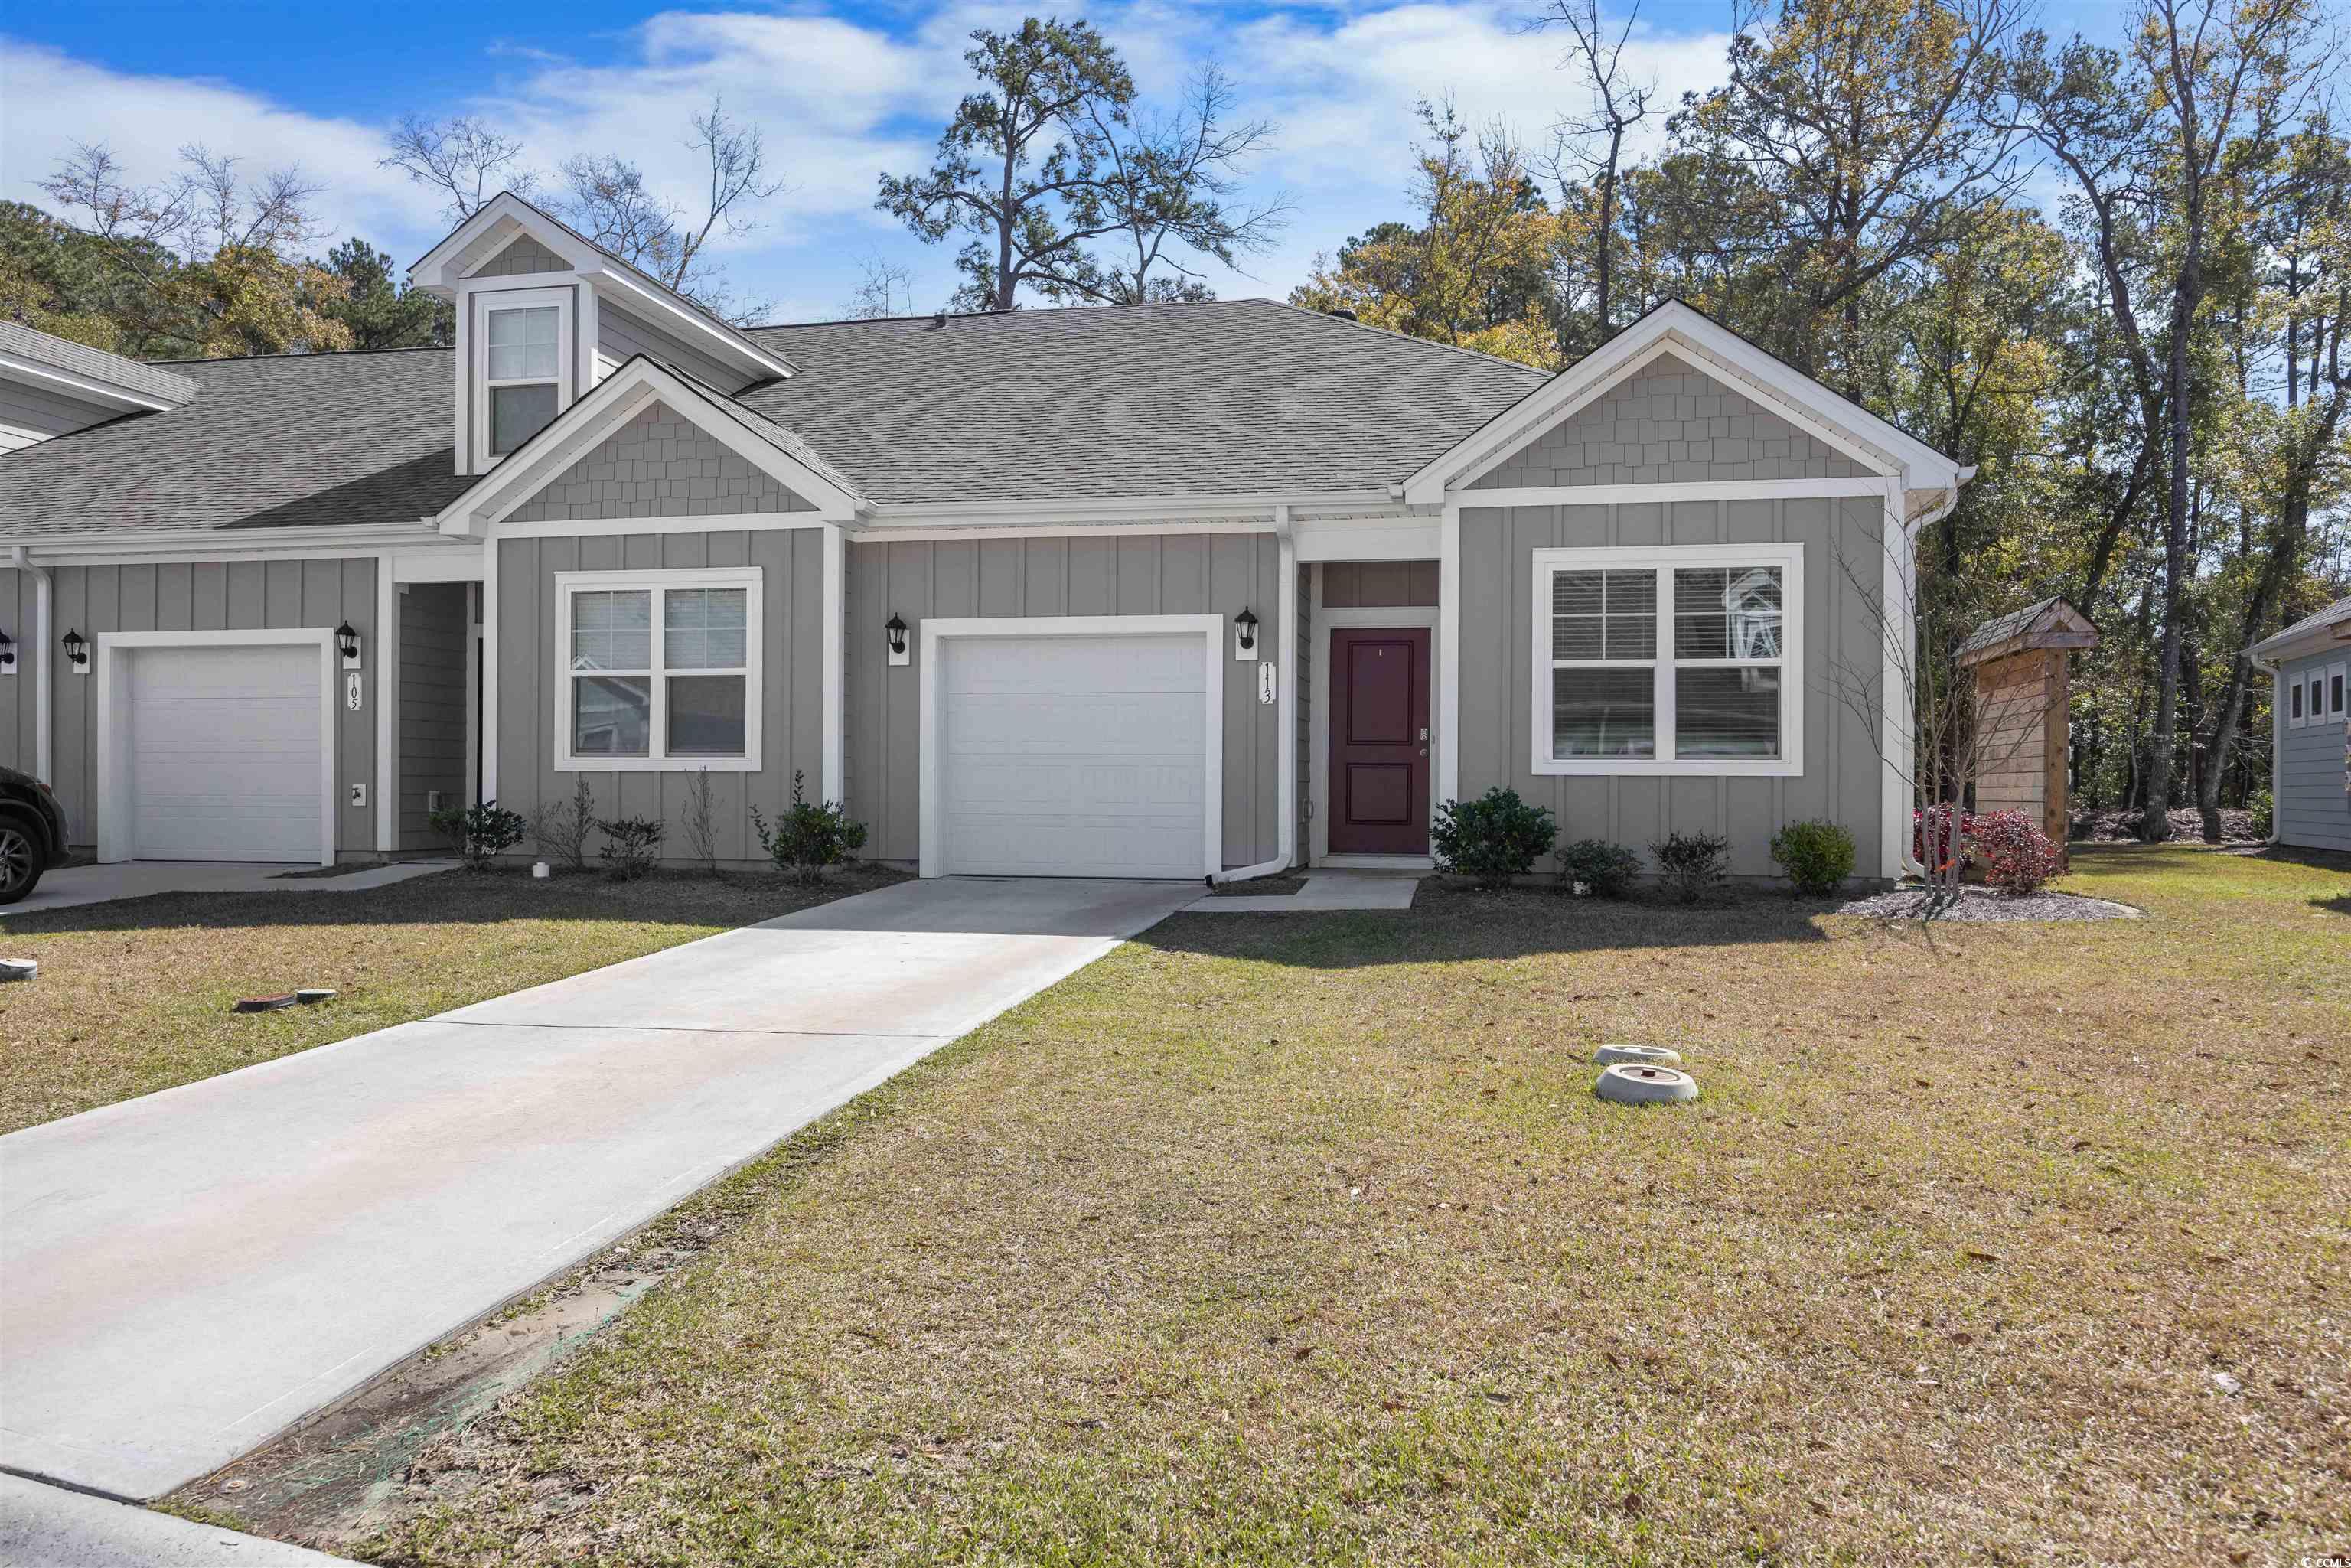 113 vineyard place is located in the highly sought after neighborhood of litchfield plantation in pawleys island sc. this recently built villa offers a 3 bedroom, 2 bathroom floor plan with many upgrades including recent painting of the interior. the living, dining and kitchen area features an open floor plan with laminate flooring, solid surface countertops and stainless steel appliances. homeowners of litchfield plantation enjoy the best in low country living exemplified with entrance by the gate house down the magnificent avenue of the oaks to the old plantation house which now serves as the neighborhood club house. other wonderful amenities include swimming pool complex overlooking the rice fields, private ocean front beach house at pawleys island, and a marina with access to the icw / waccamaw river. litchfield planation is located with easy access to all the local, laid back lifestyle of pawleys island with great shopping, sumptuous restaurants, terrific golf just outside the gates. all the fun of myrtle beach is located just 20 miles north and the historic beauty of charleston sc only 60 miles south.